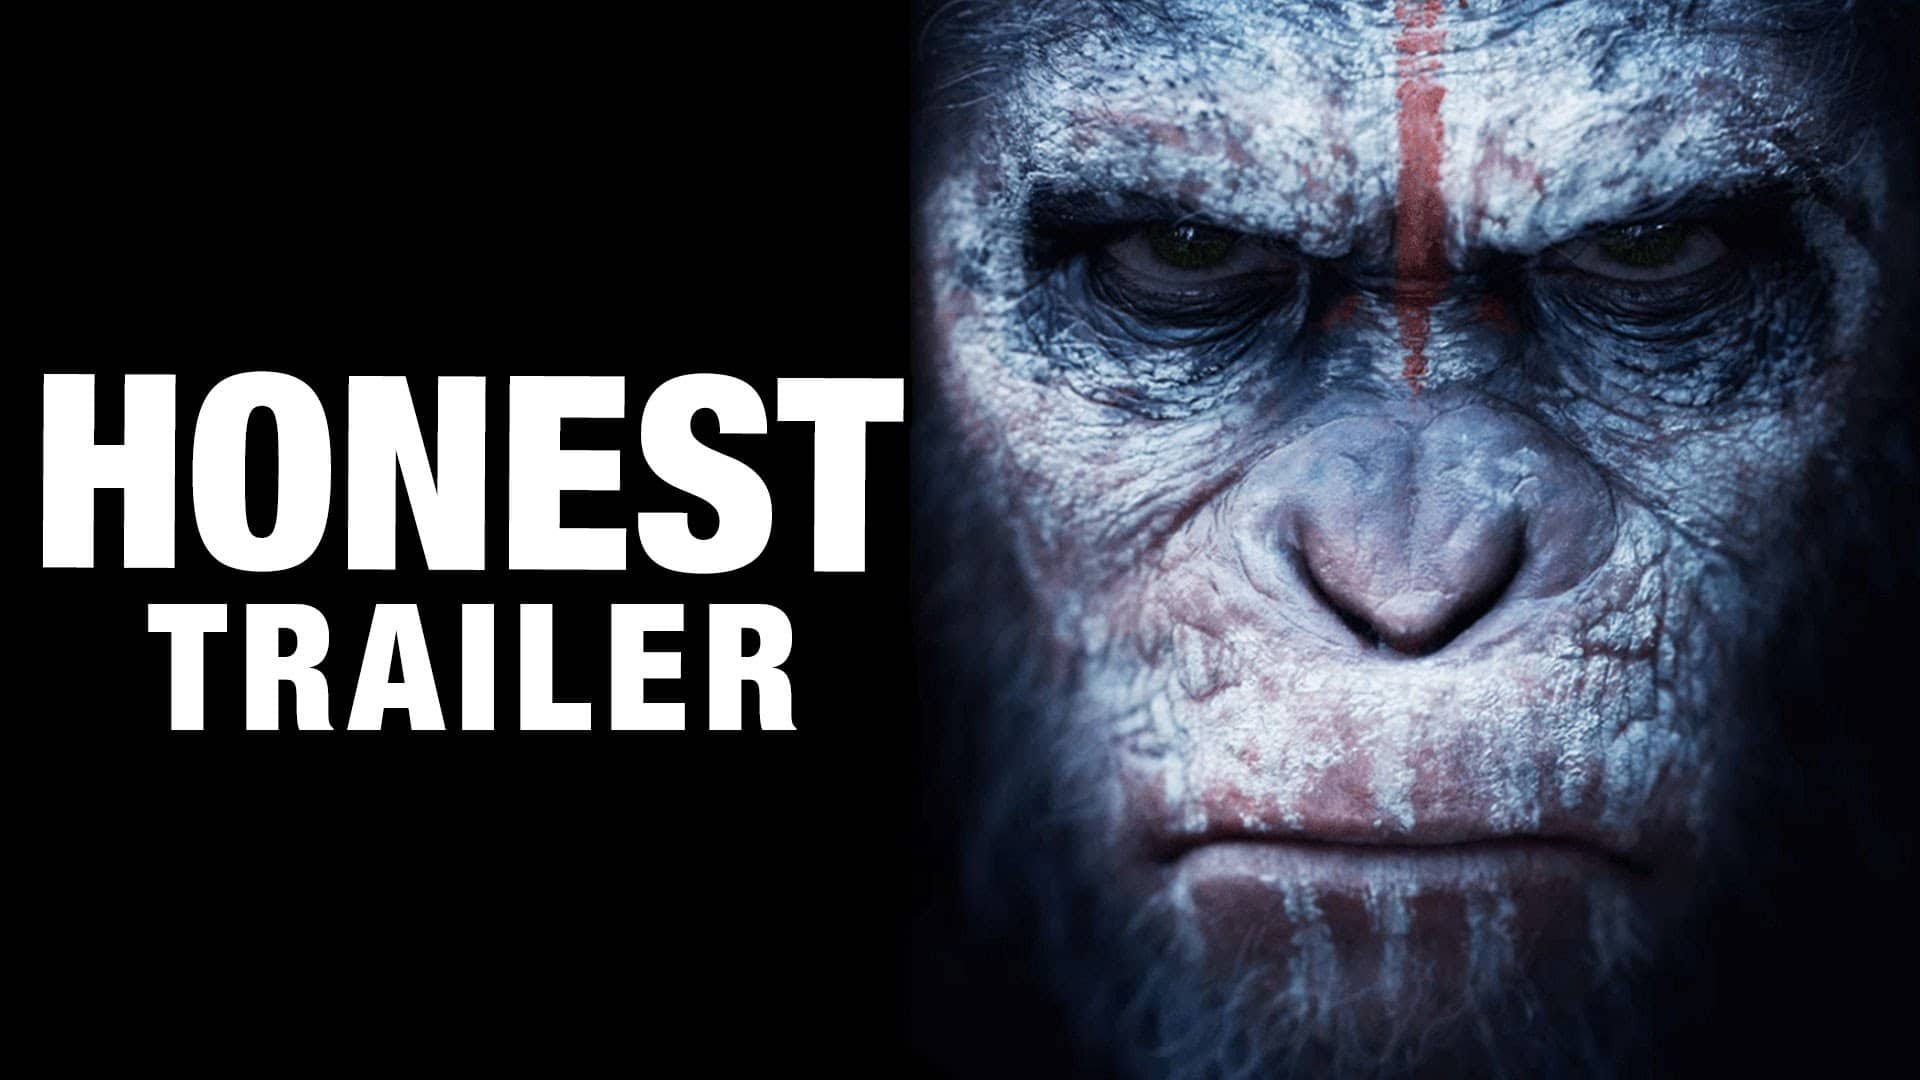 The Honest Trailer: Dawn of the Planet of the Apes. فيلم The Honest Trailer: Dawn of the Planet of the Apes